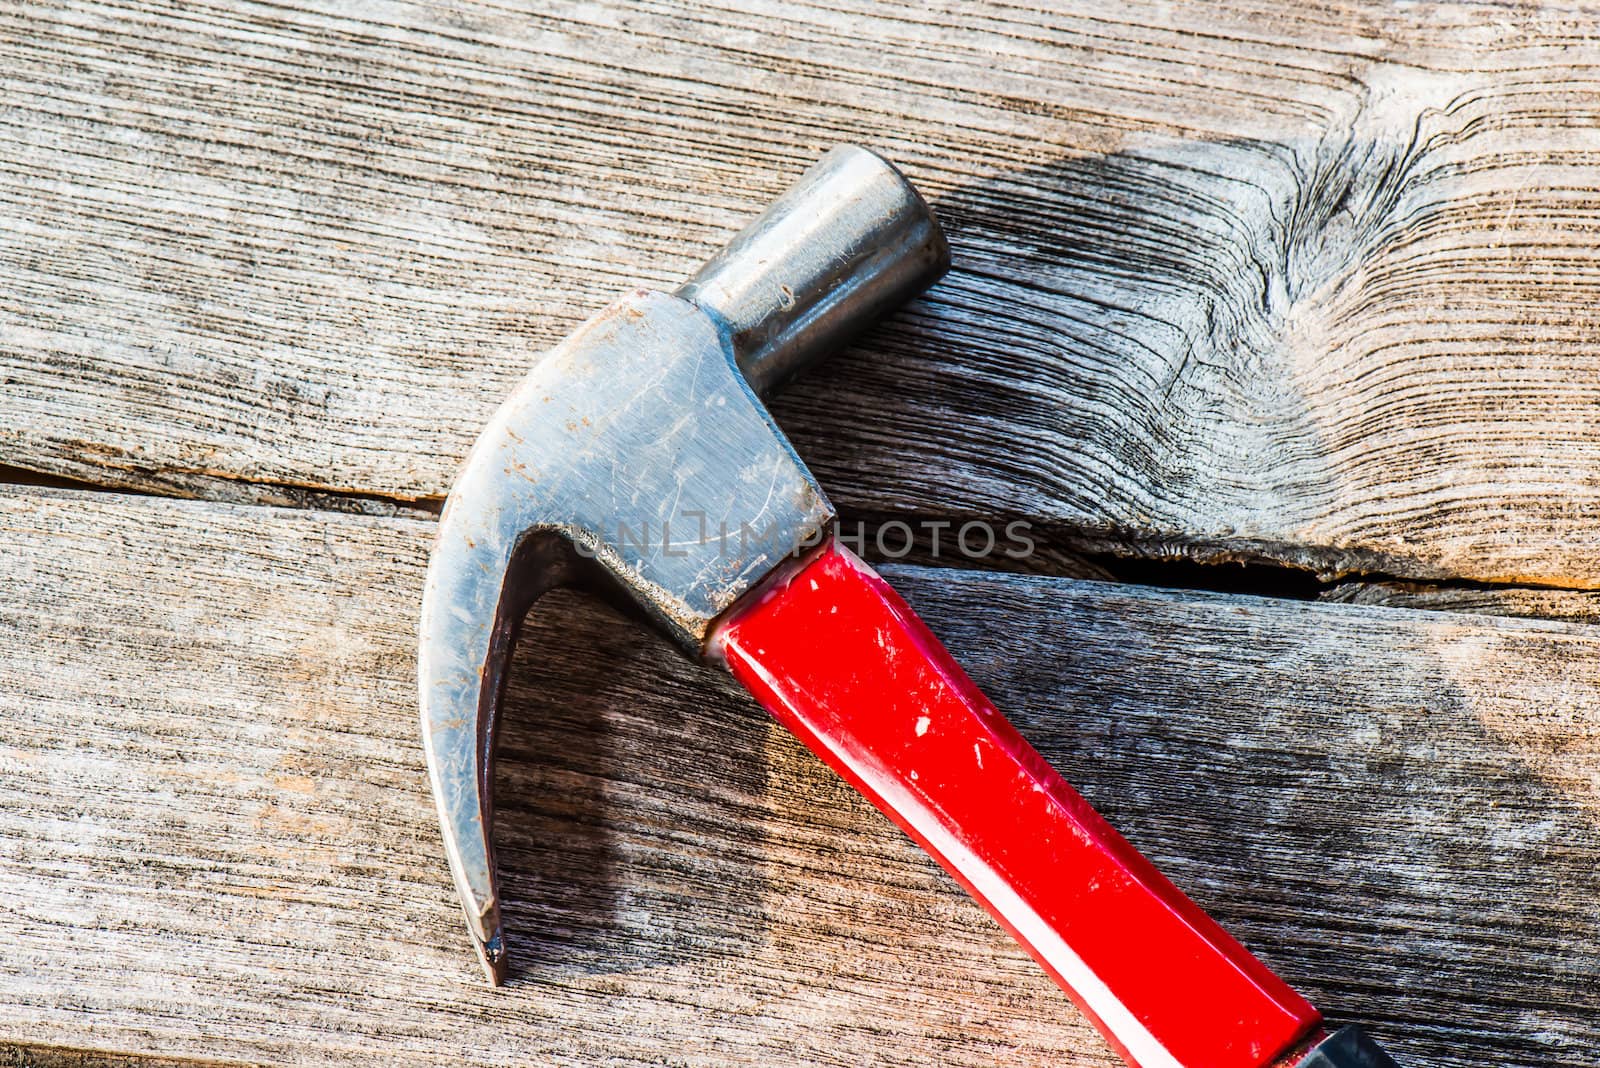 Hammer on a old wooden table top. Industrial tool.